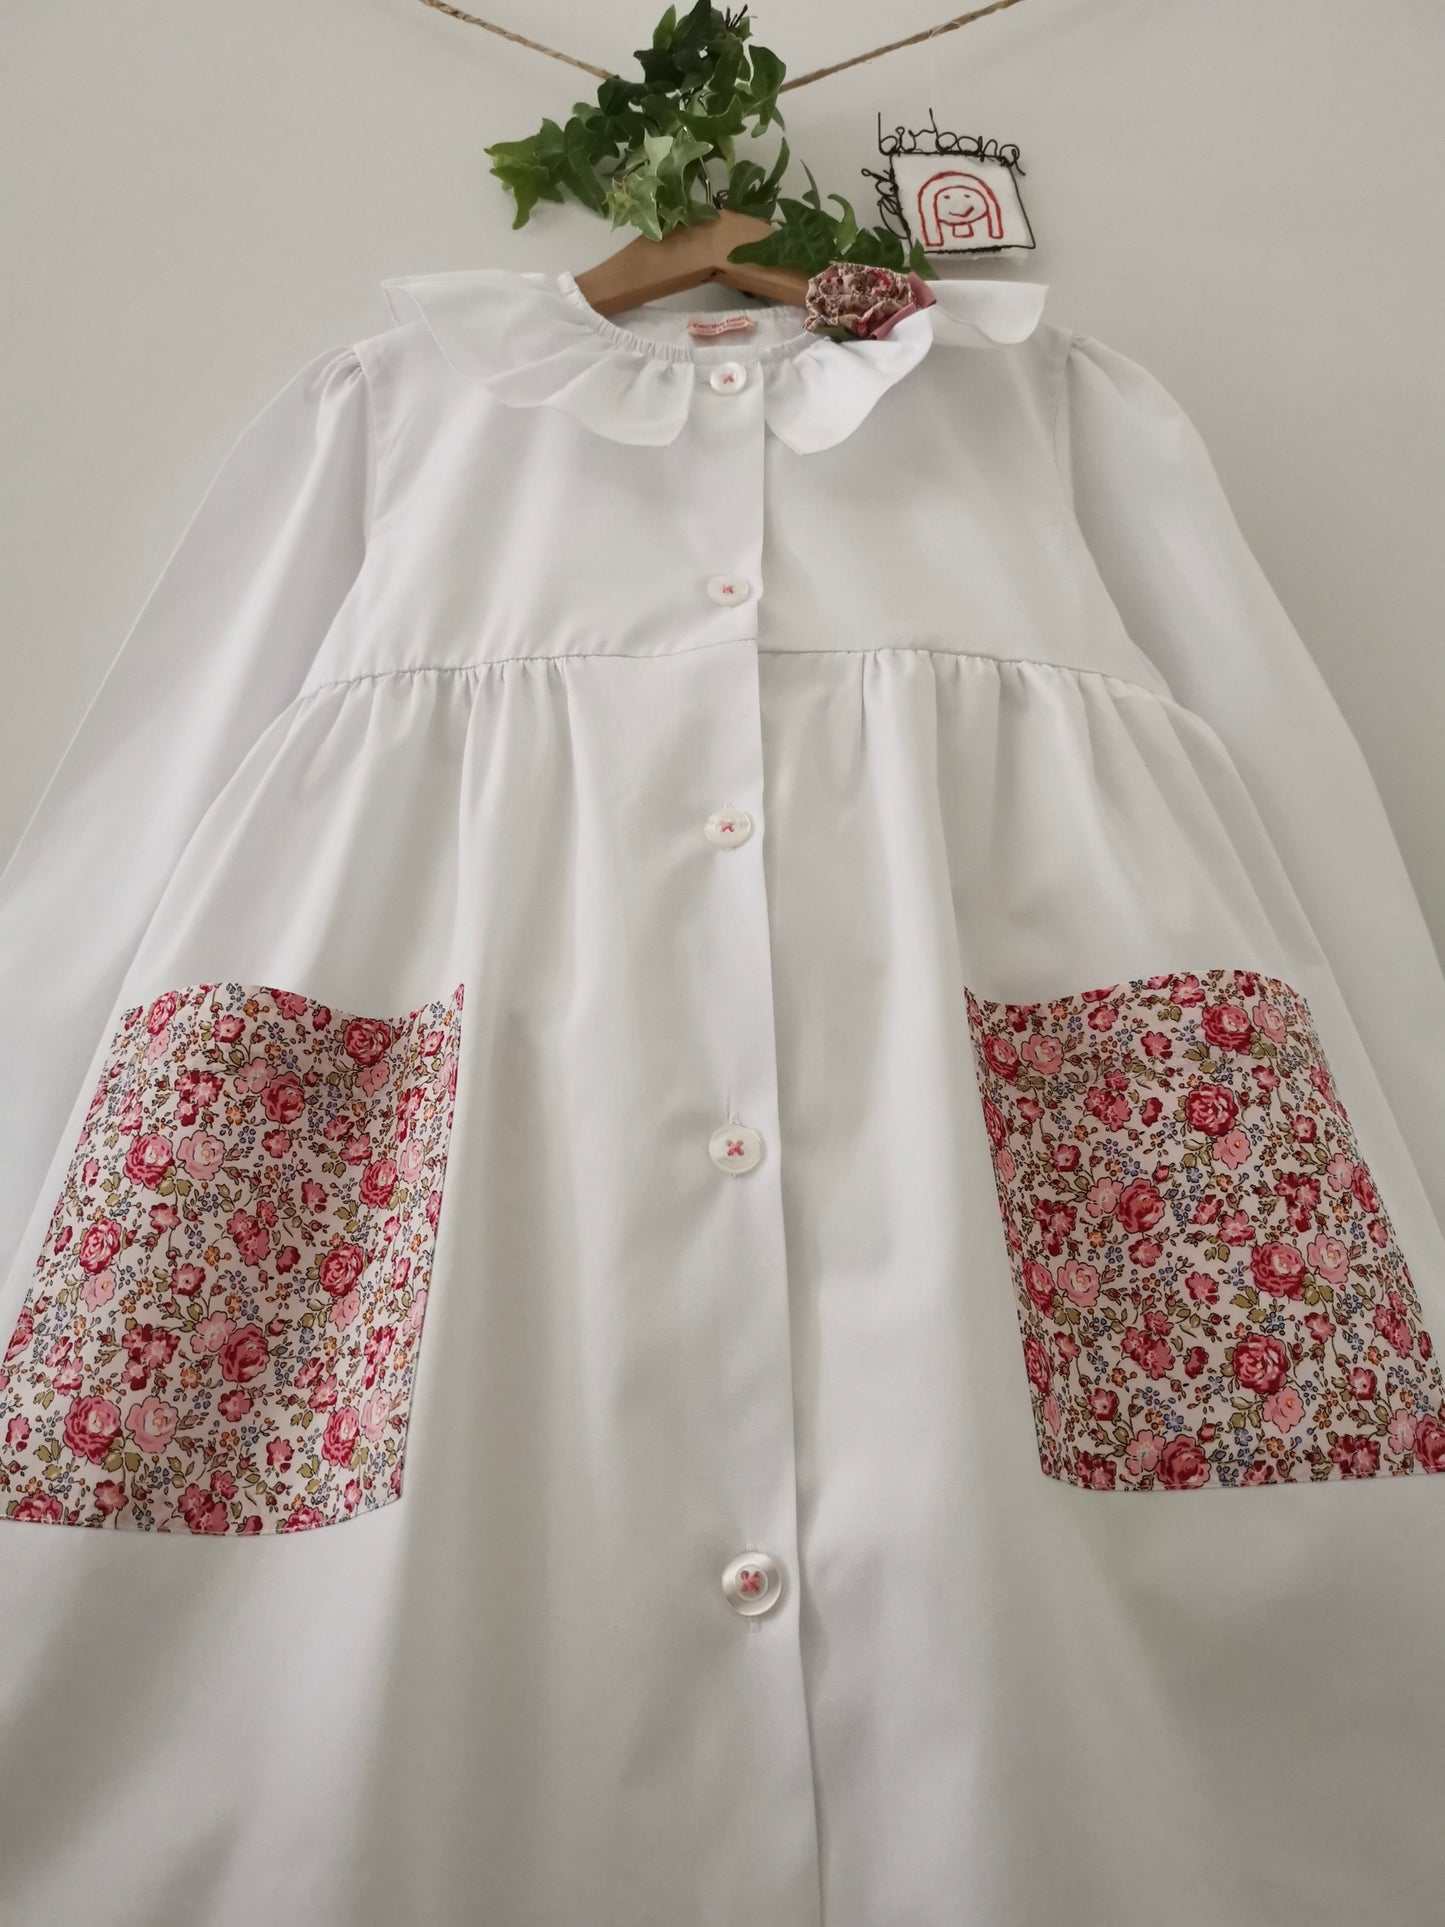 The white apron with roses and forget-me-nots and pierrot collar for primary school